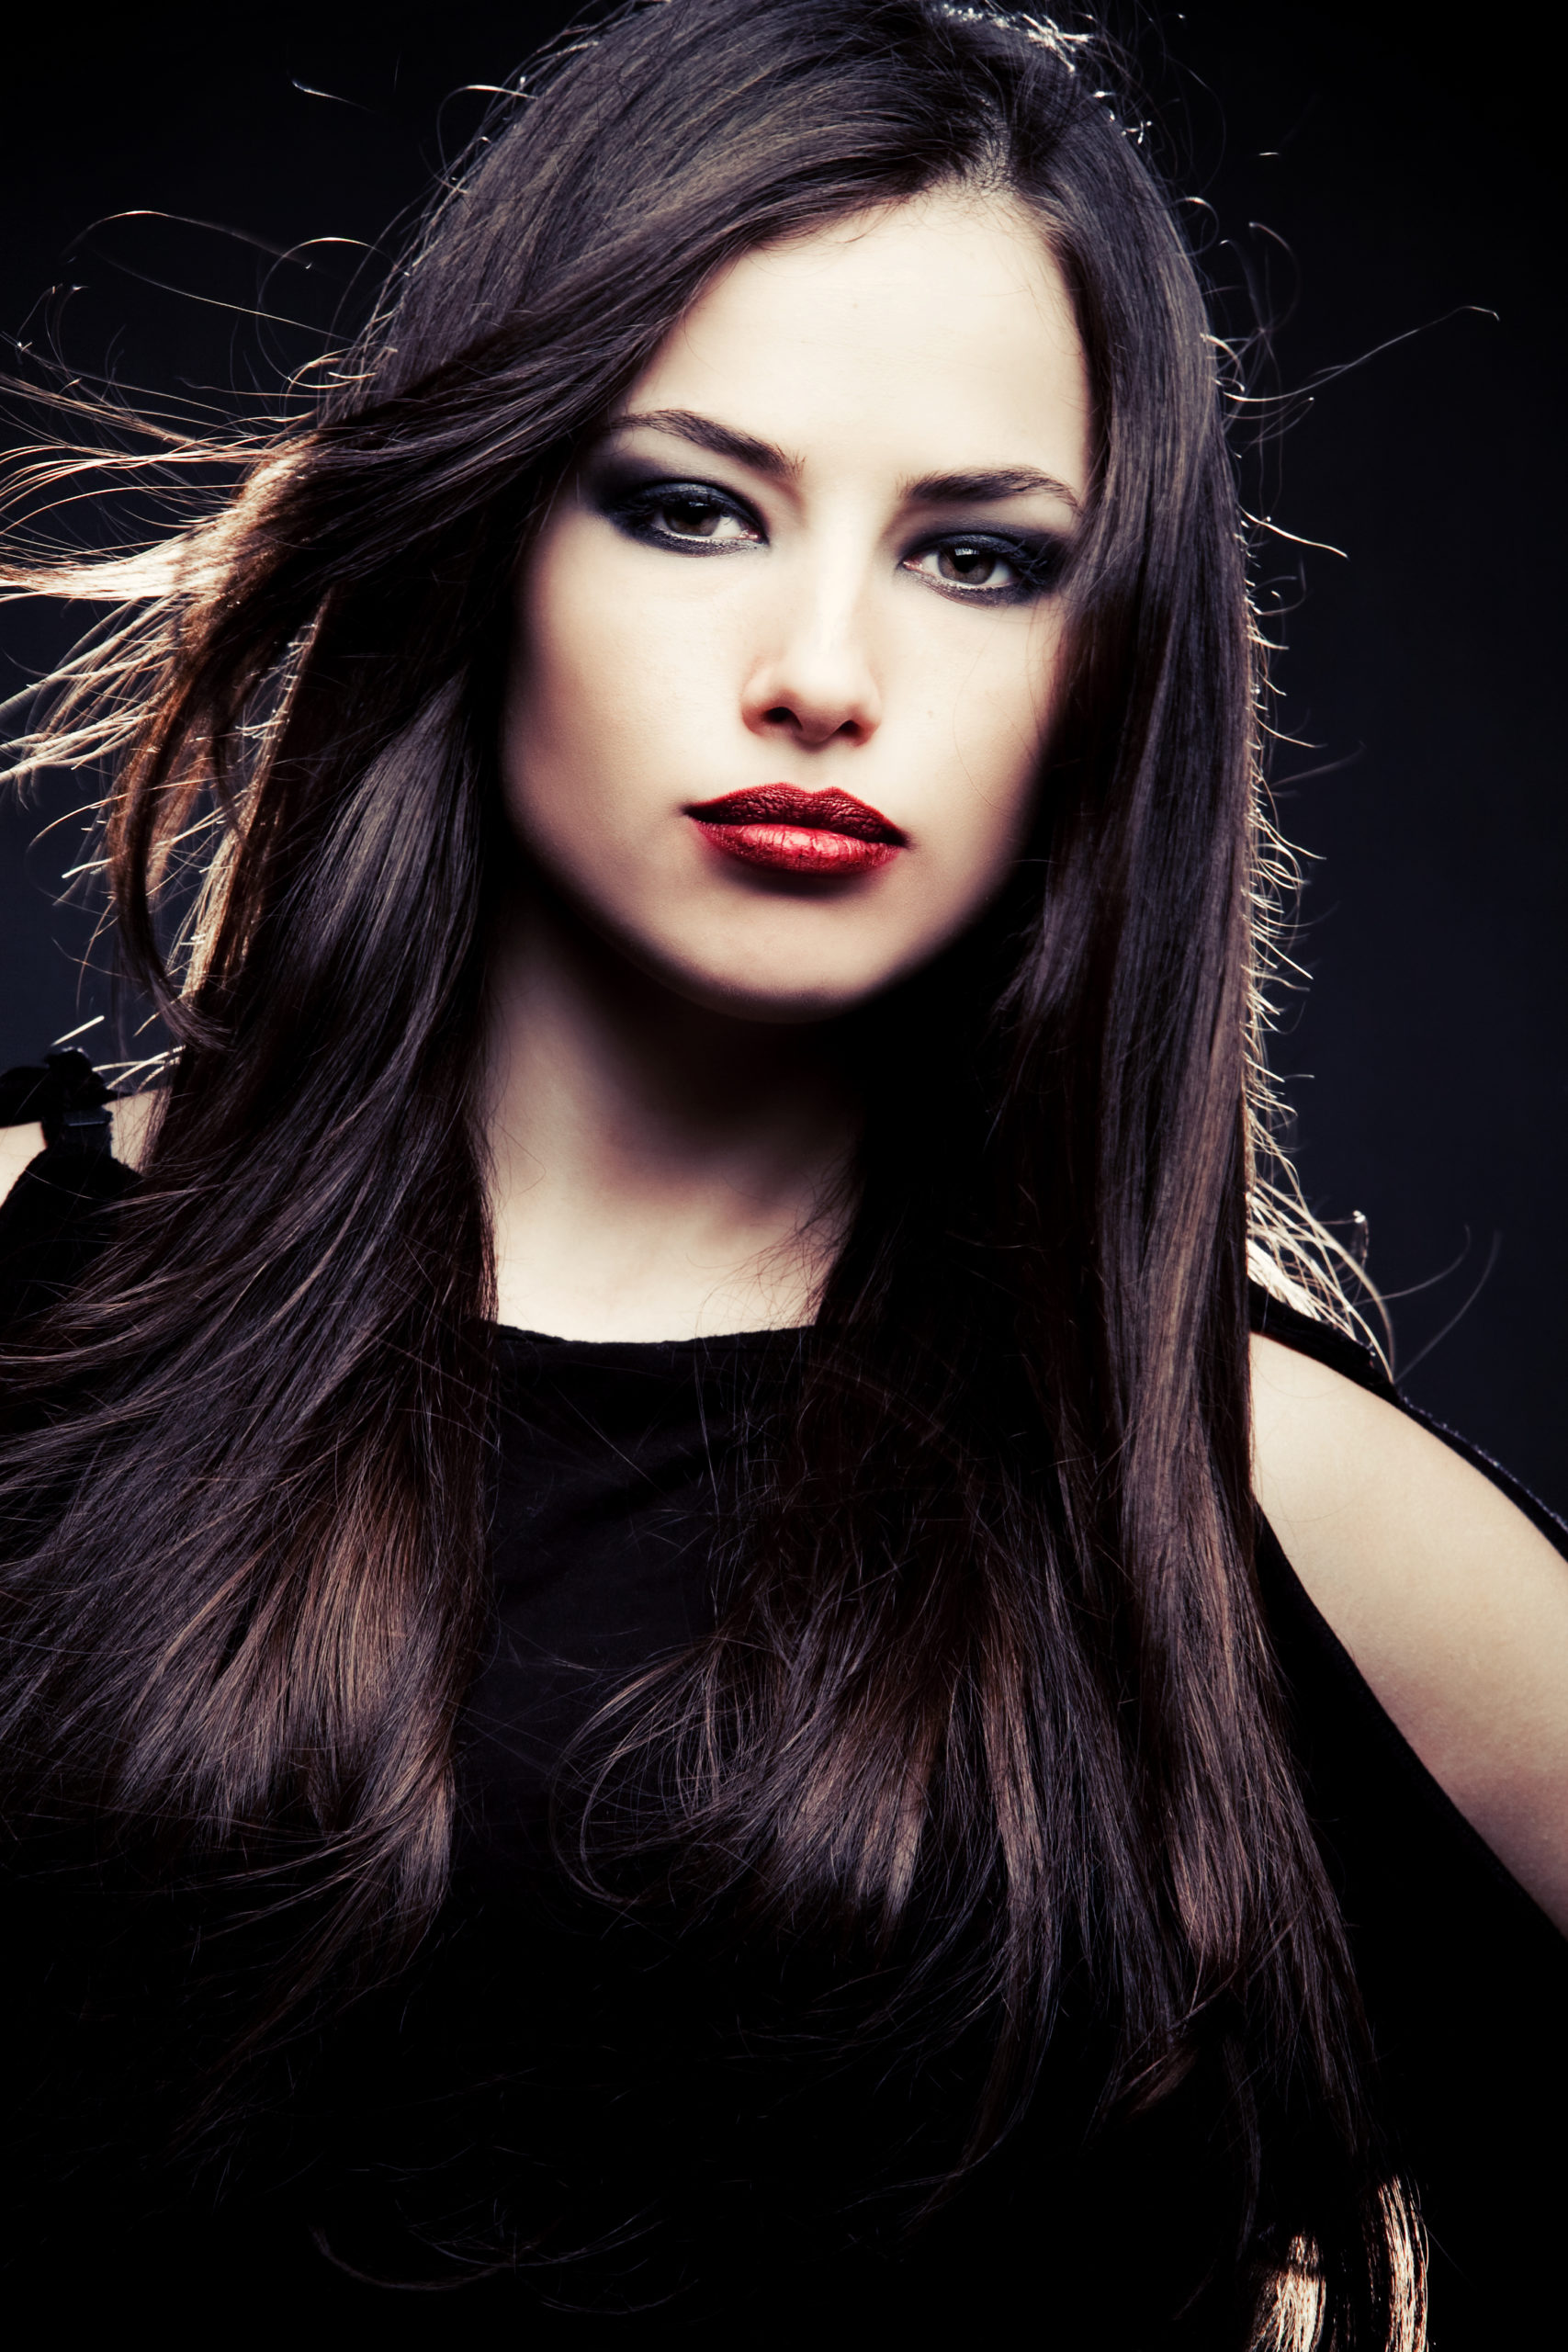 Black With Dark Chocolate Highlights, one of the best winter hair colors, on a woman in a black dress